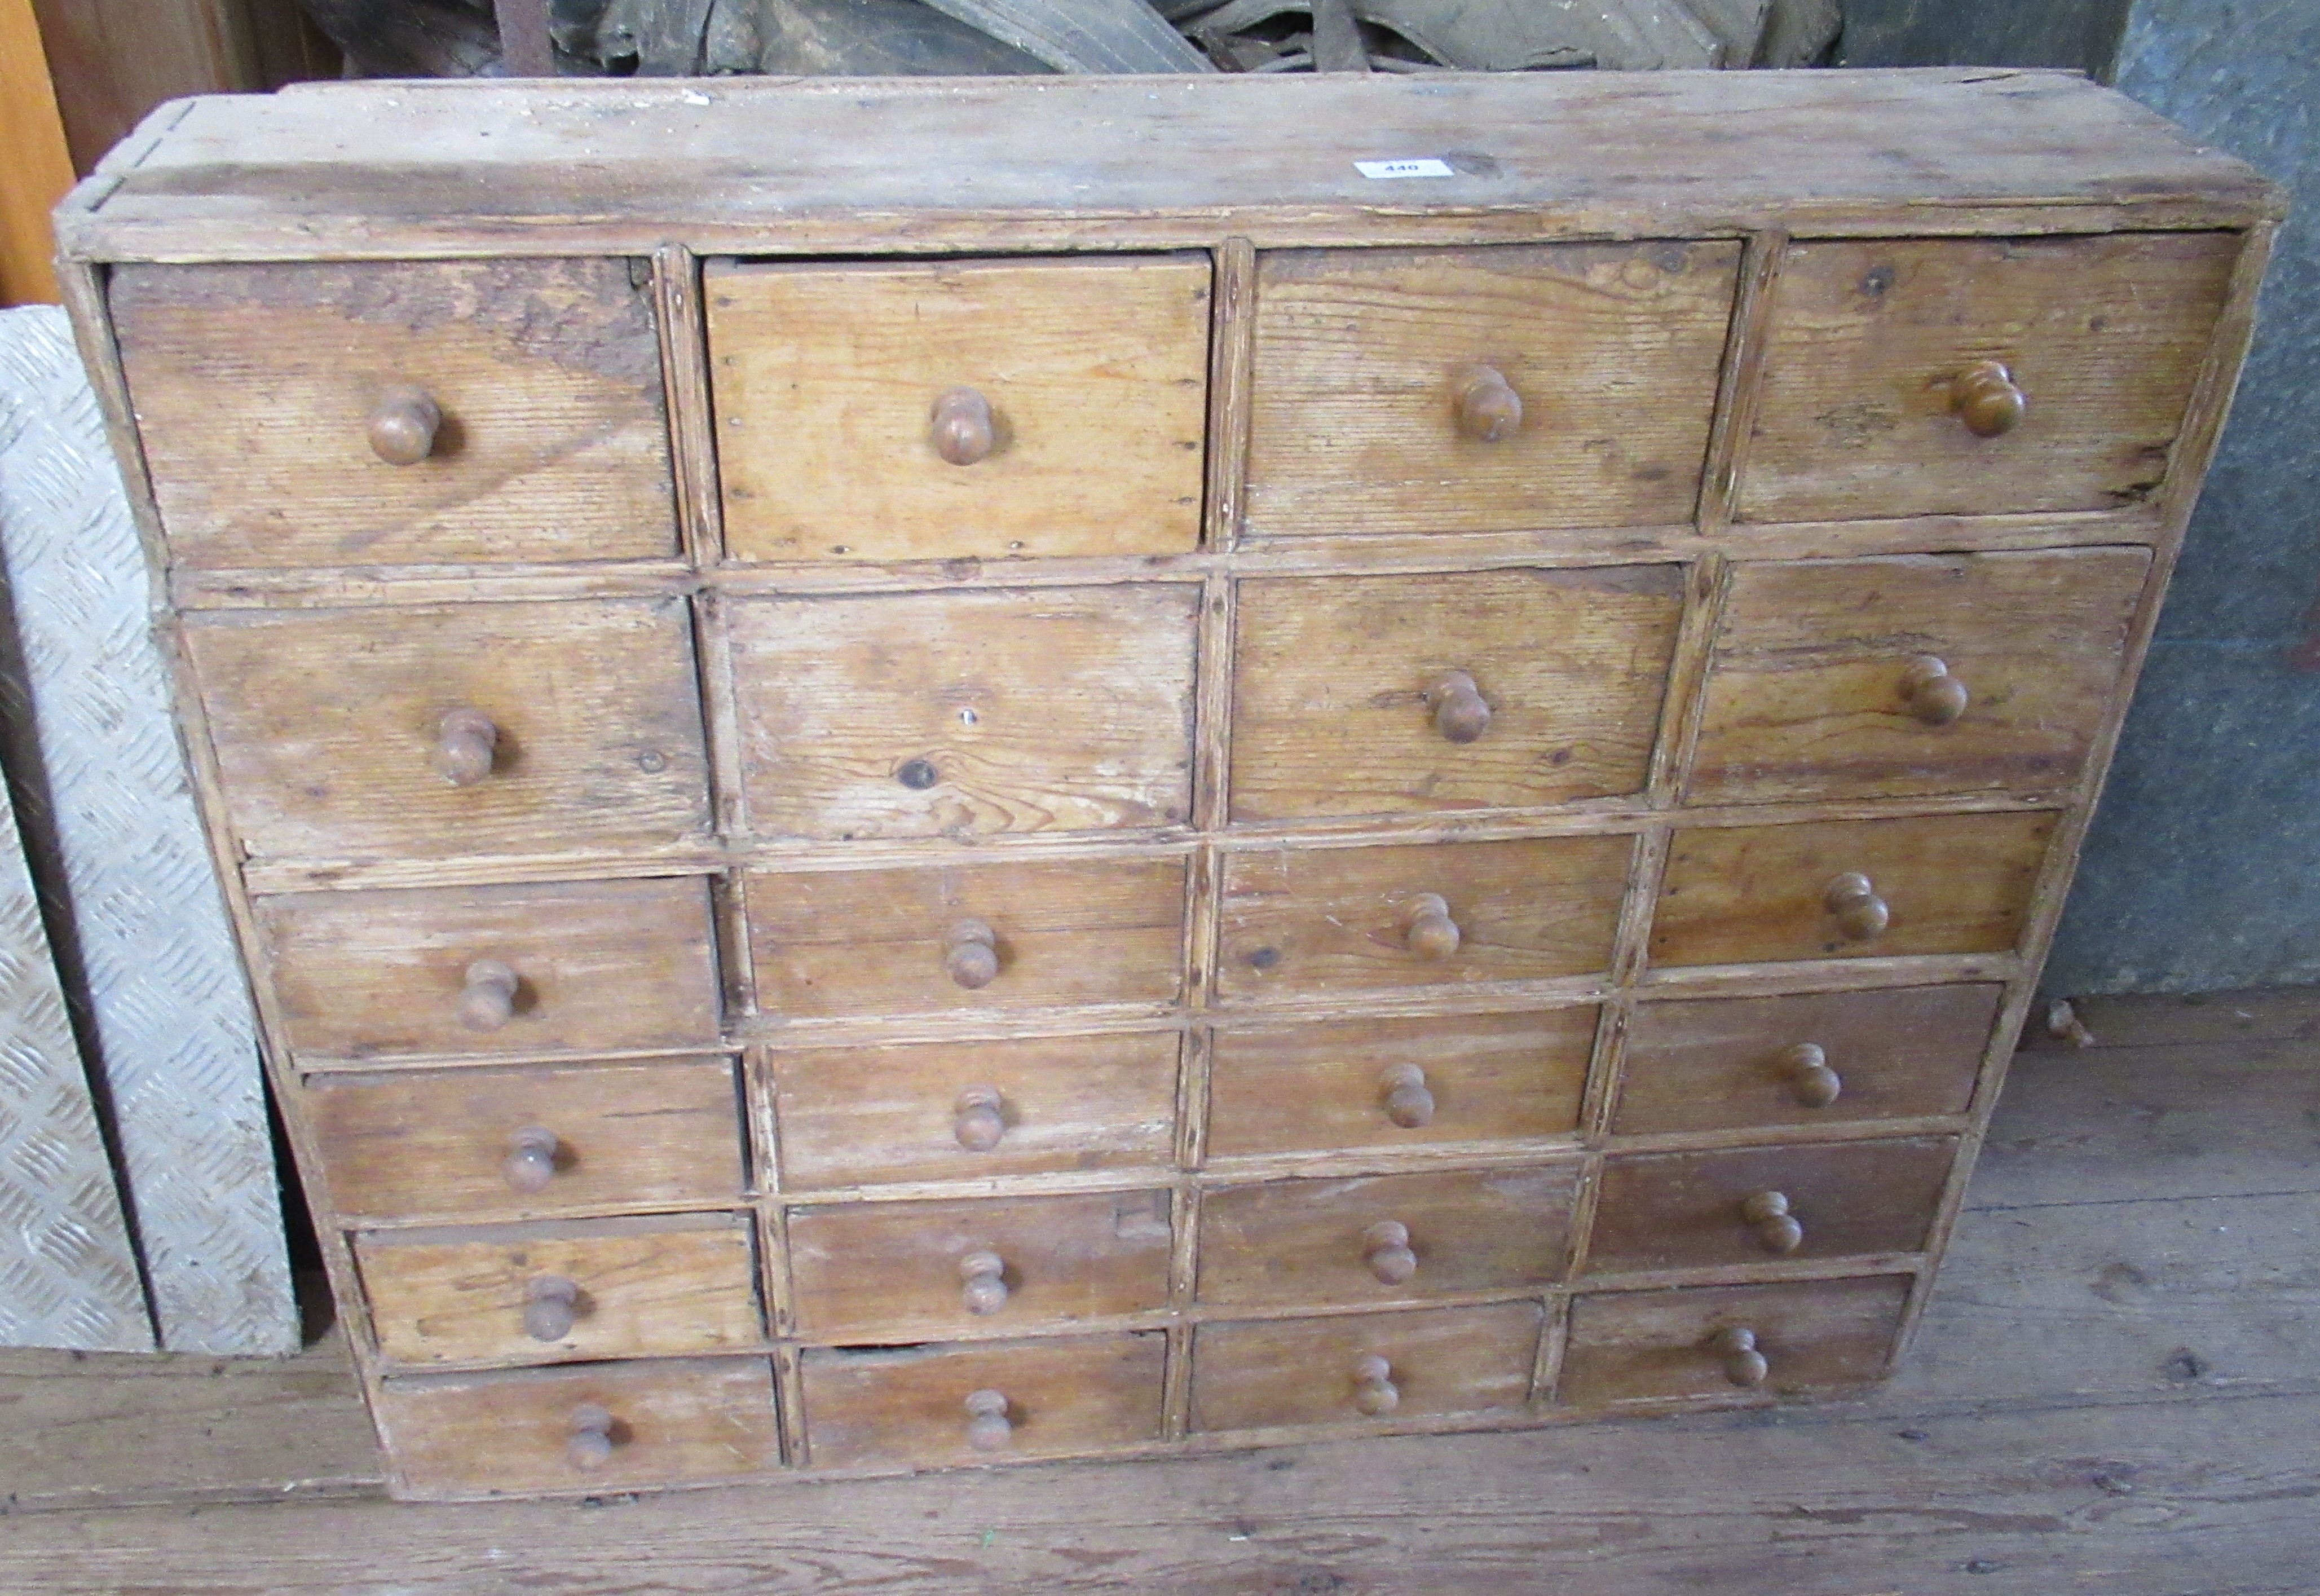 A pine set of drawers